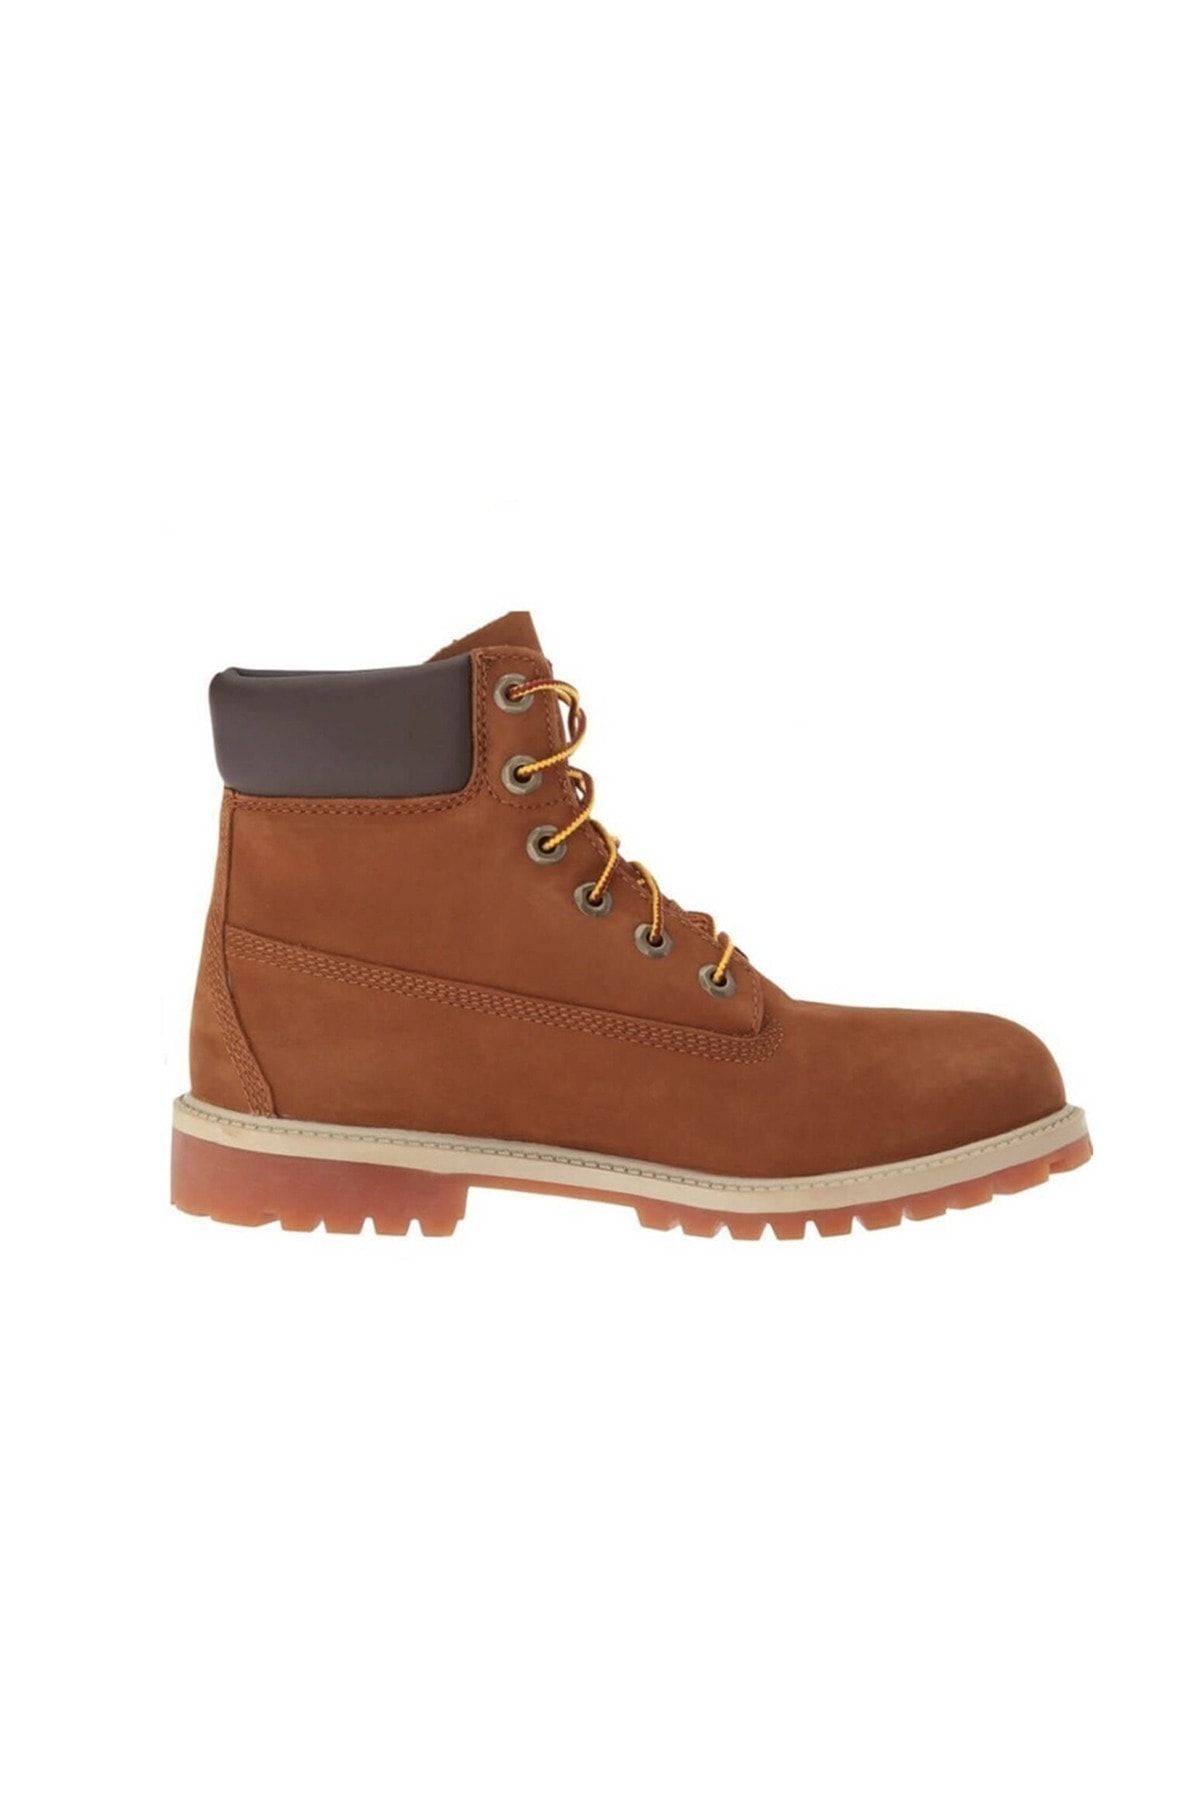 Timberland Tb0149492141 6 In Premıum Wp Boot